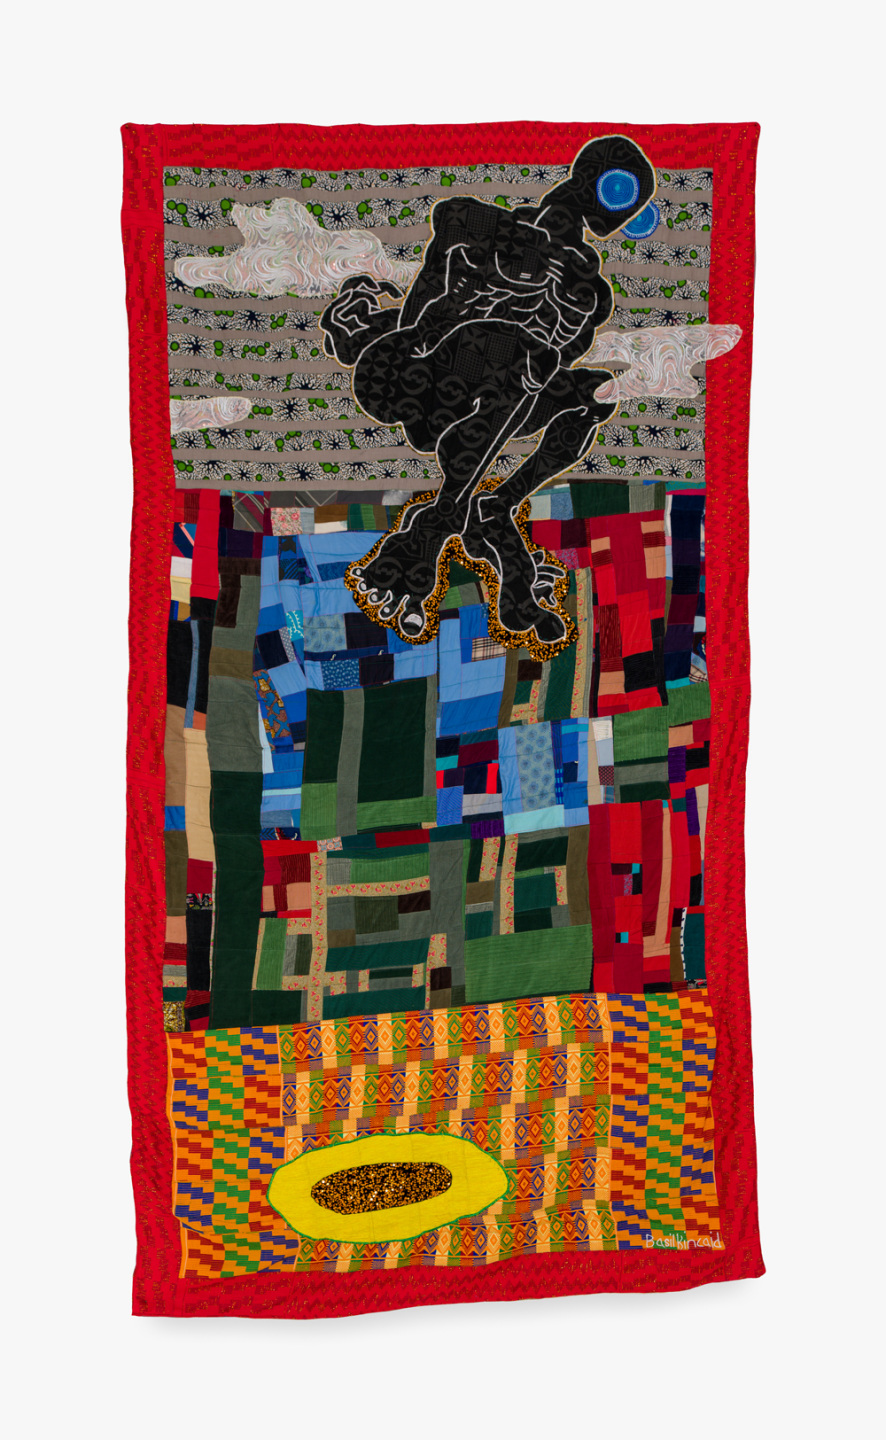 The Frog, 2022, Basil Kincaid. Quilt; 128 x 69 x 6 in (325.1 x 175.3 x 15.2 cm). Courtesy the artist and Venus Over Manhattan.